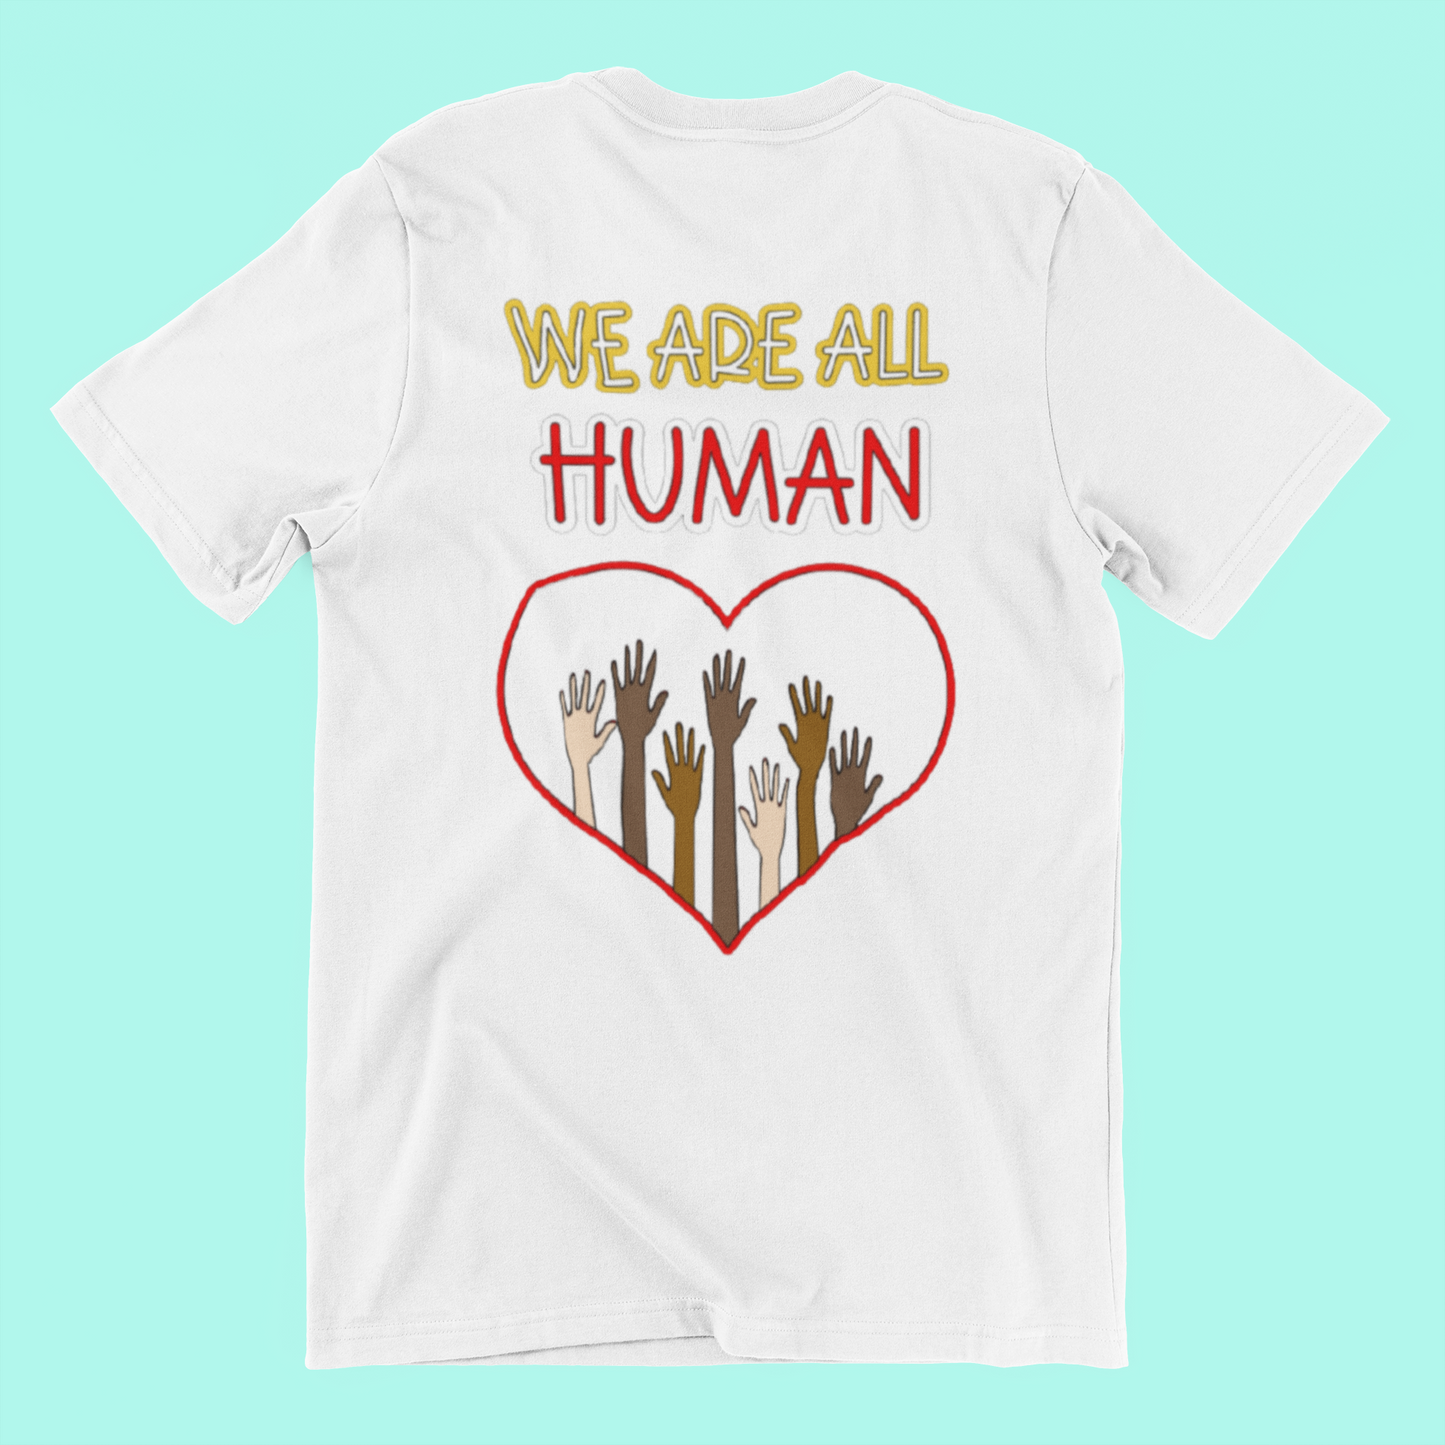 We are Human T-shirt